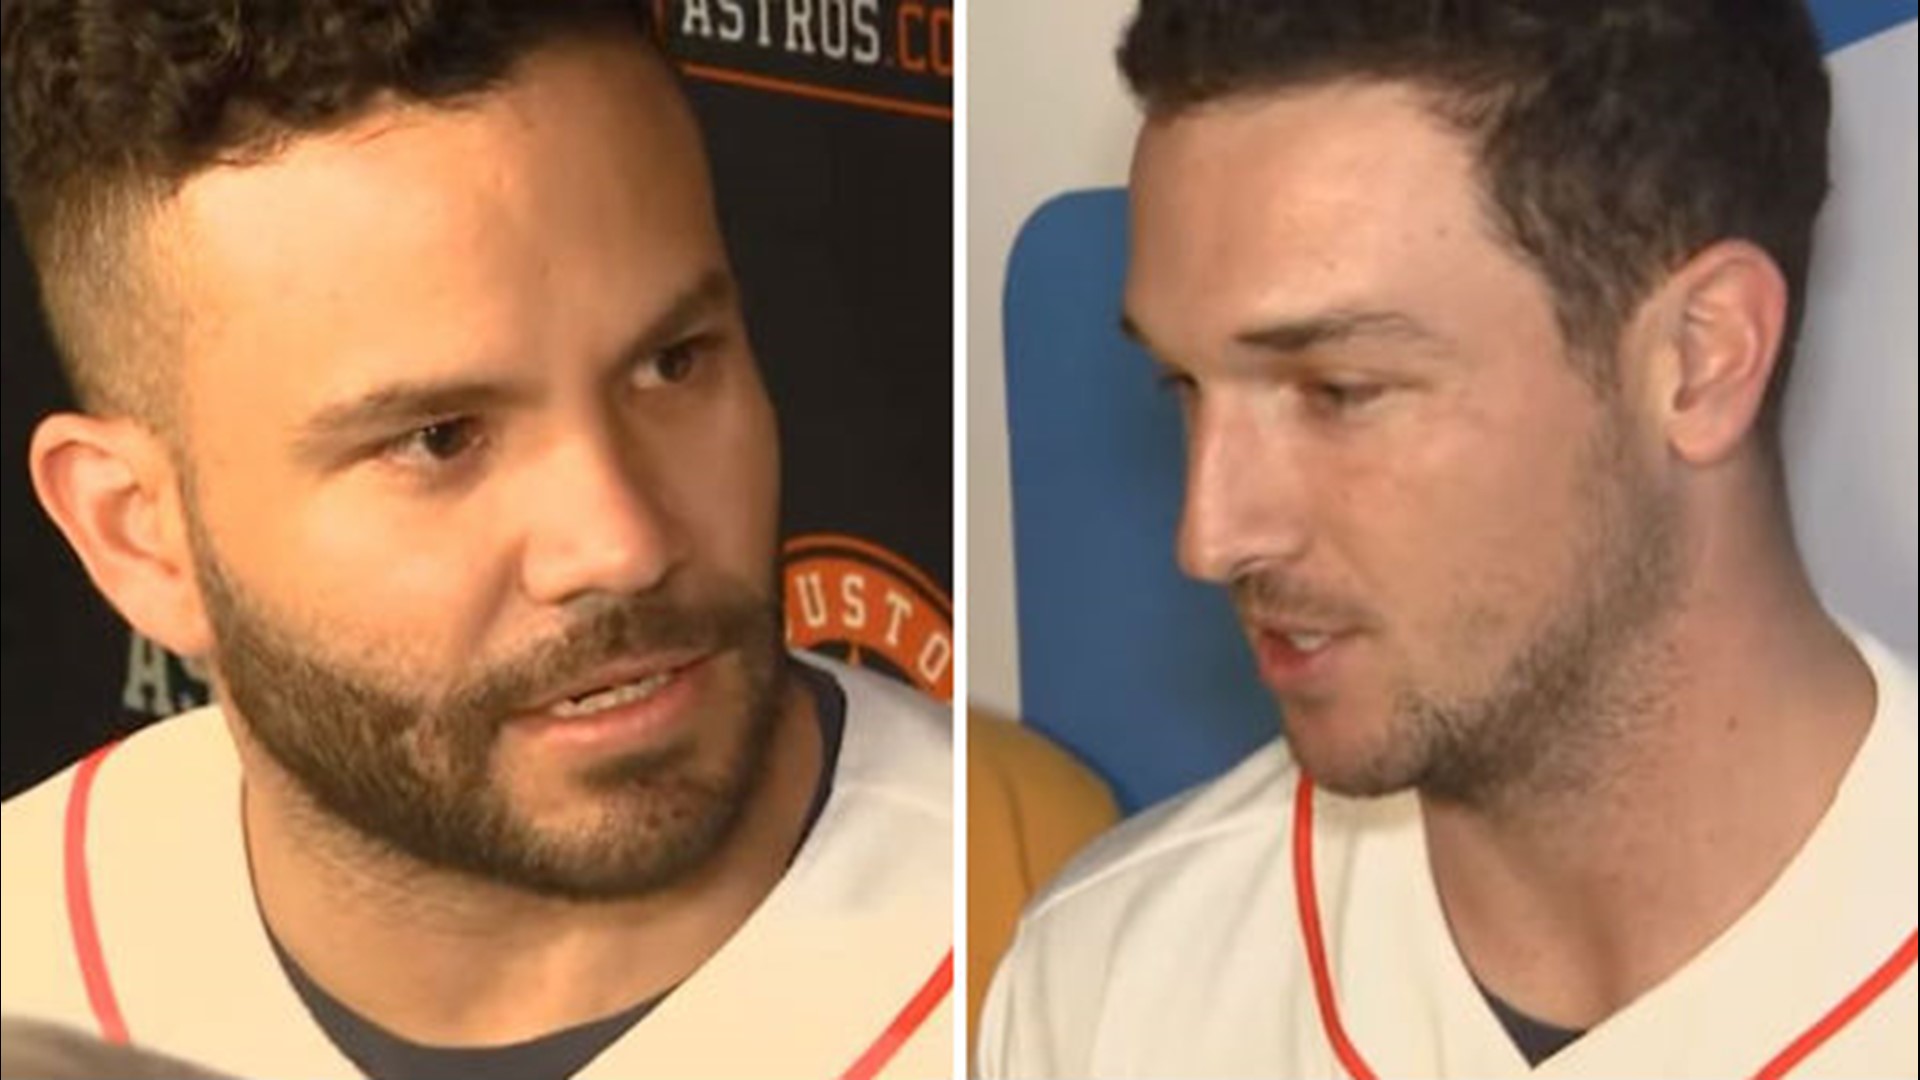 Several Astros players were at Fan Fest Saturday, and some of them were asked about the sign-stealing scandal.